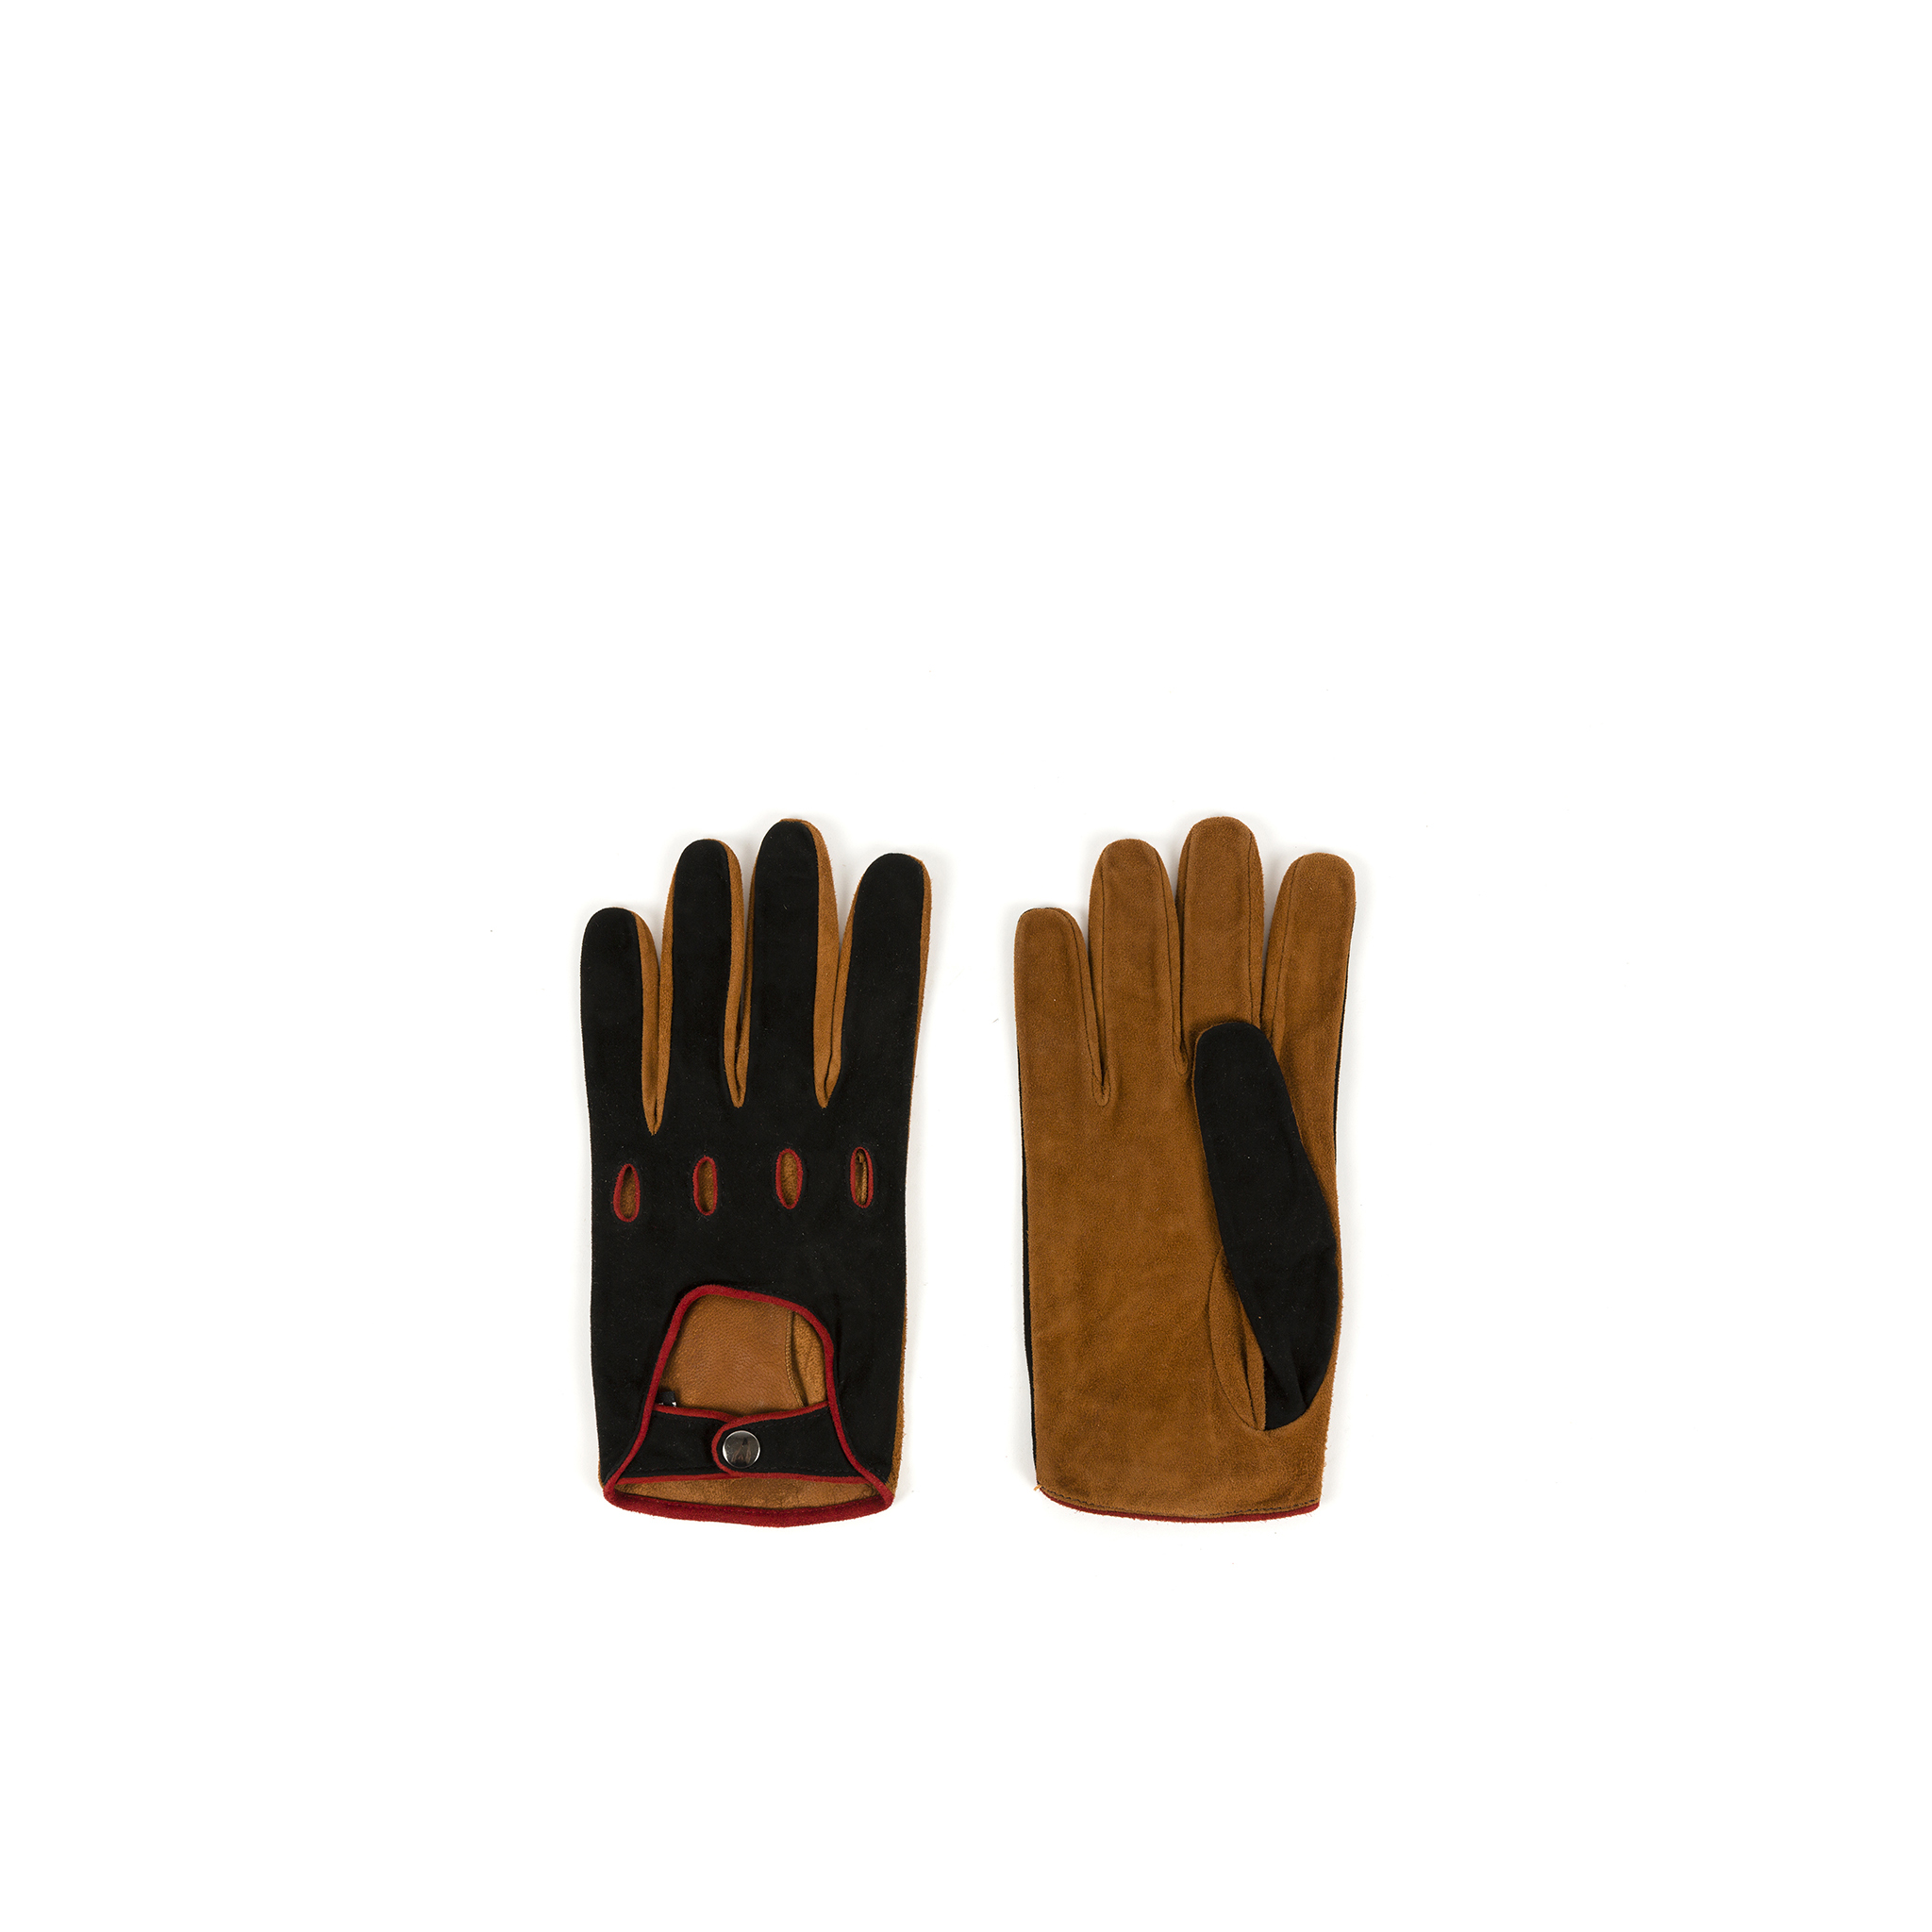 Sport Gloves - Suede lamb leather - Red color